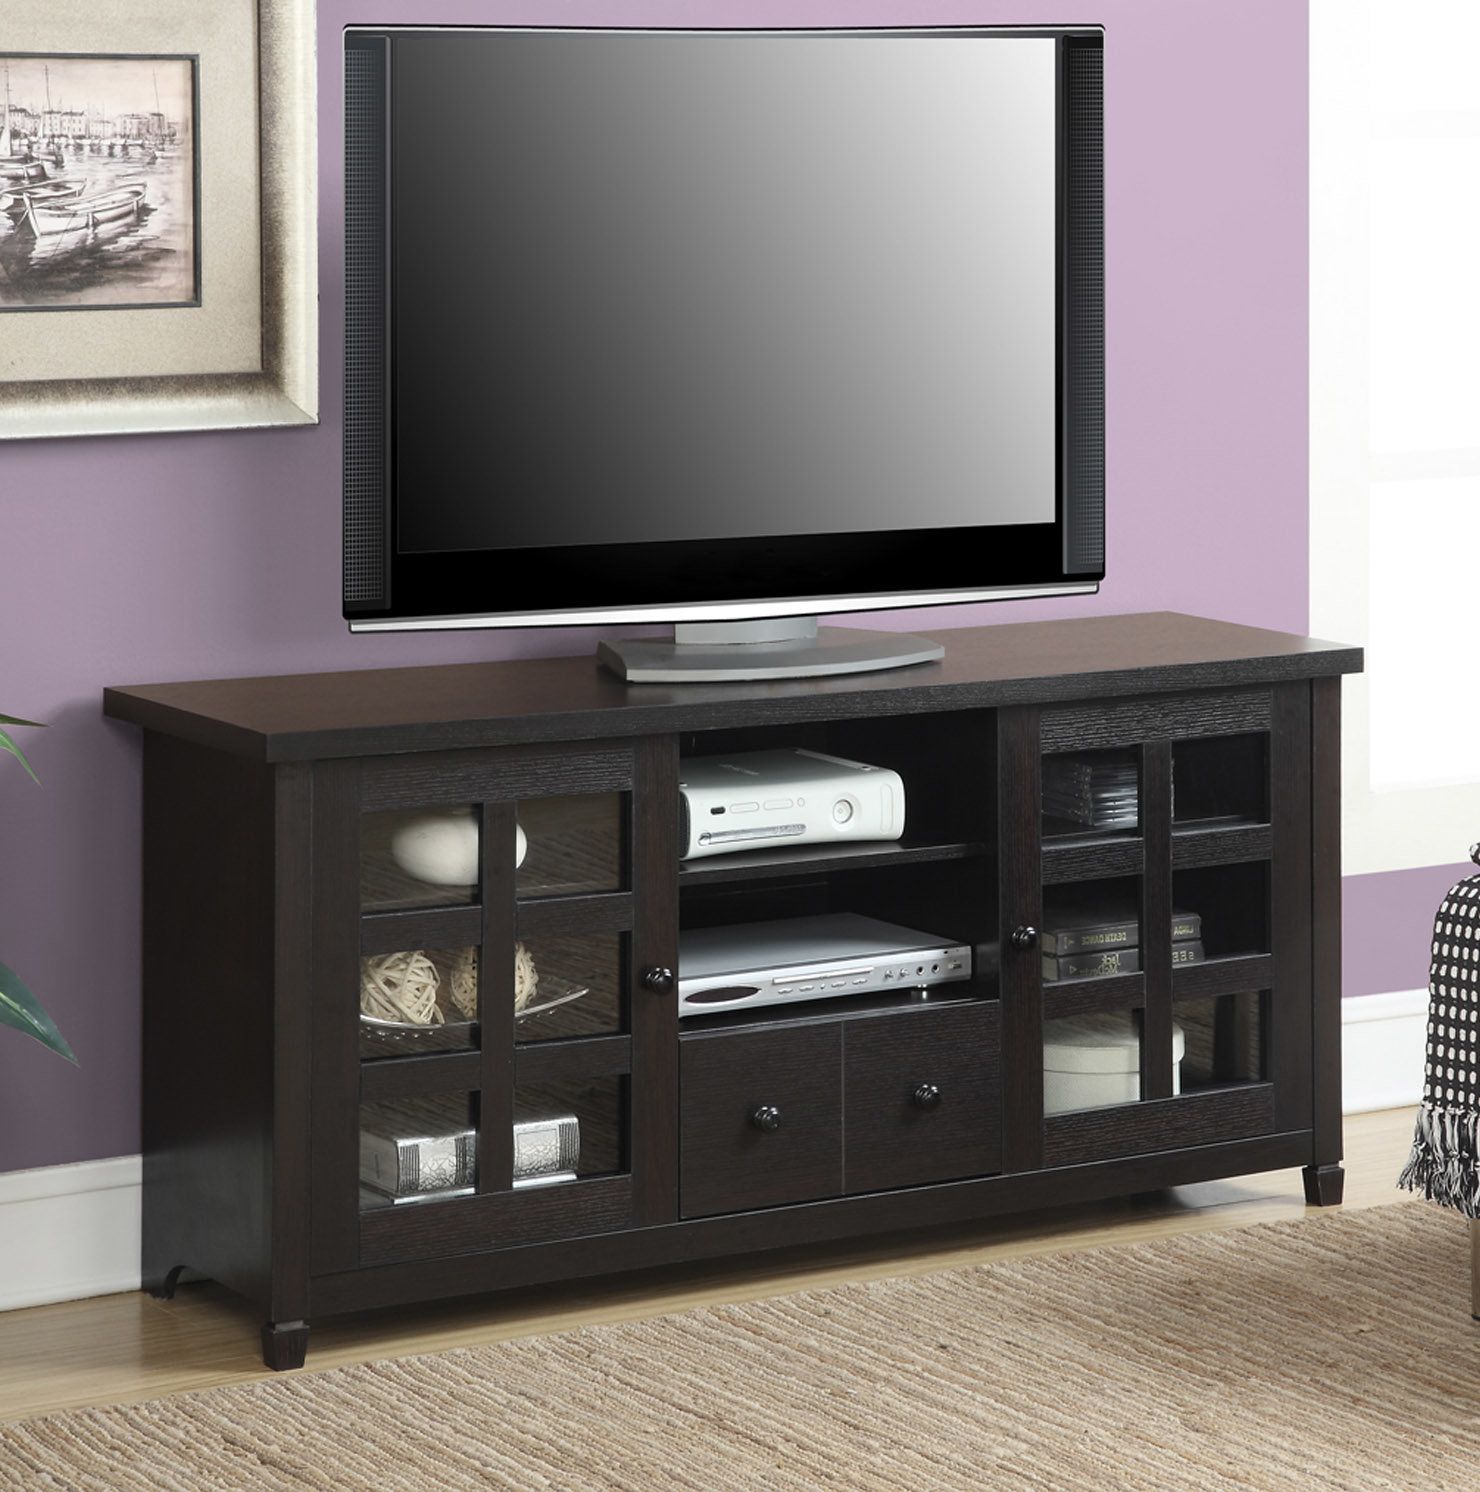 Andover Mills Shepparton Tv Stand For Tvs Up To 60" & Reviews | Wayfair Throughout Laurent 60 Inch Tv Stands (View 12 of 20)